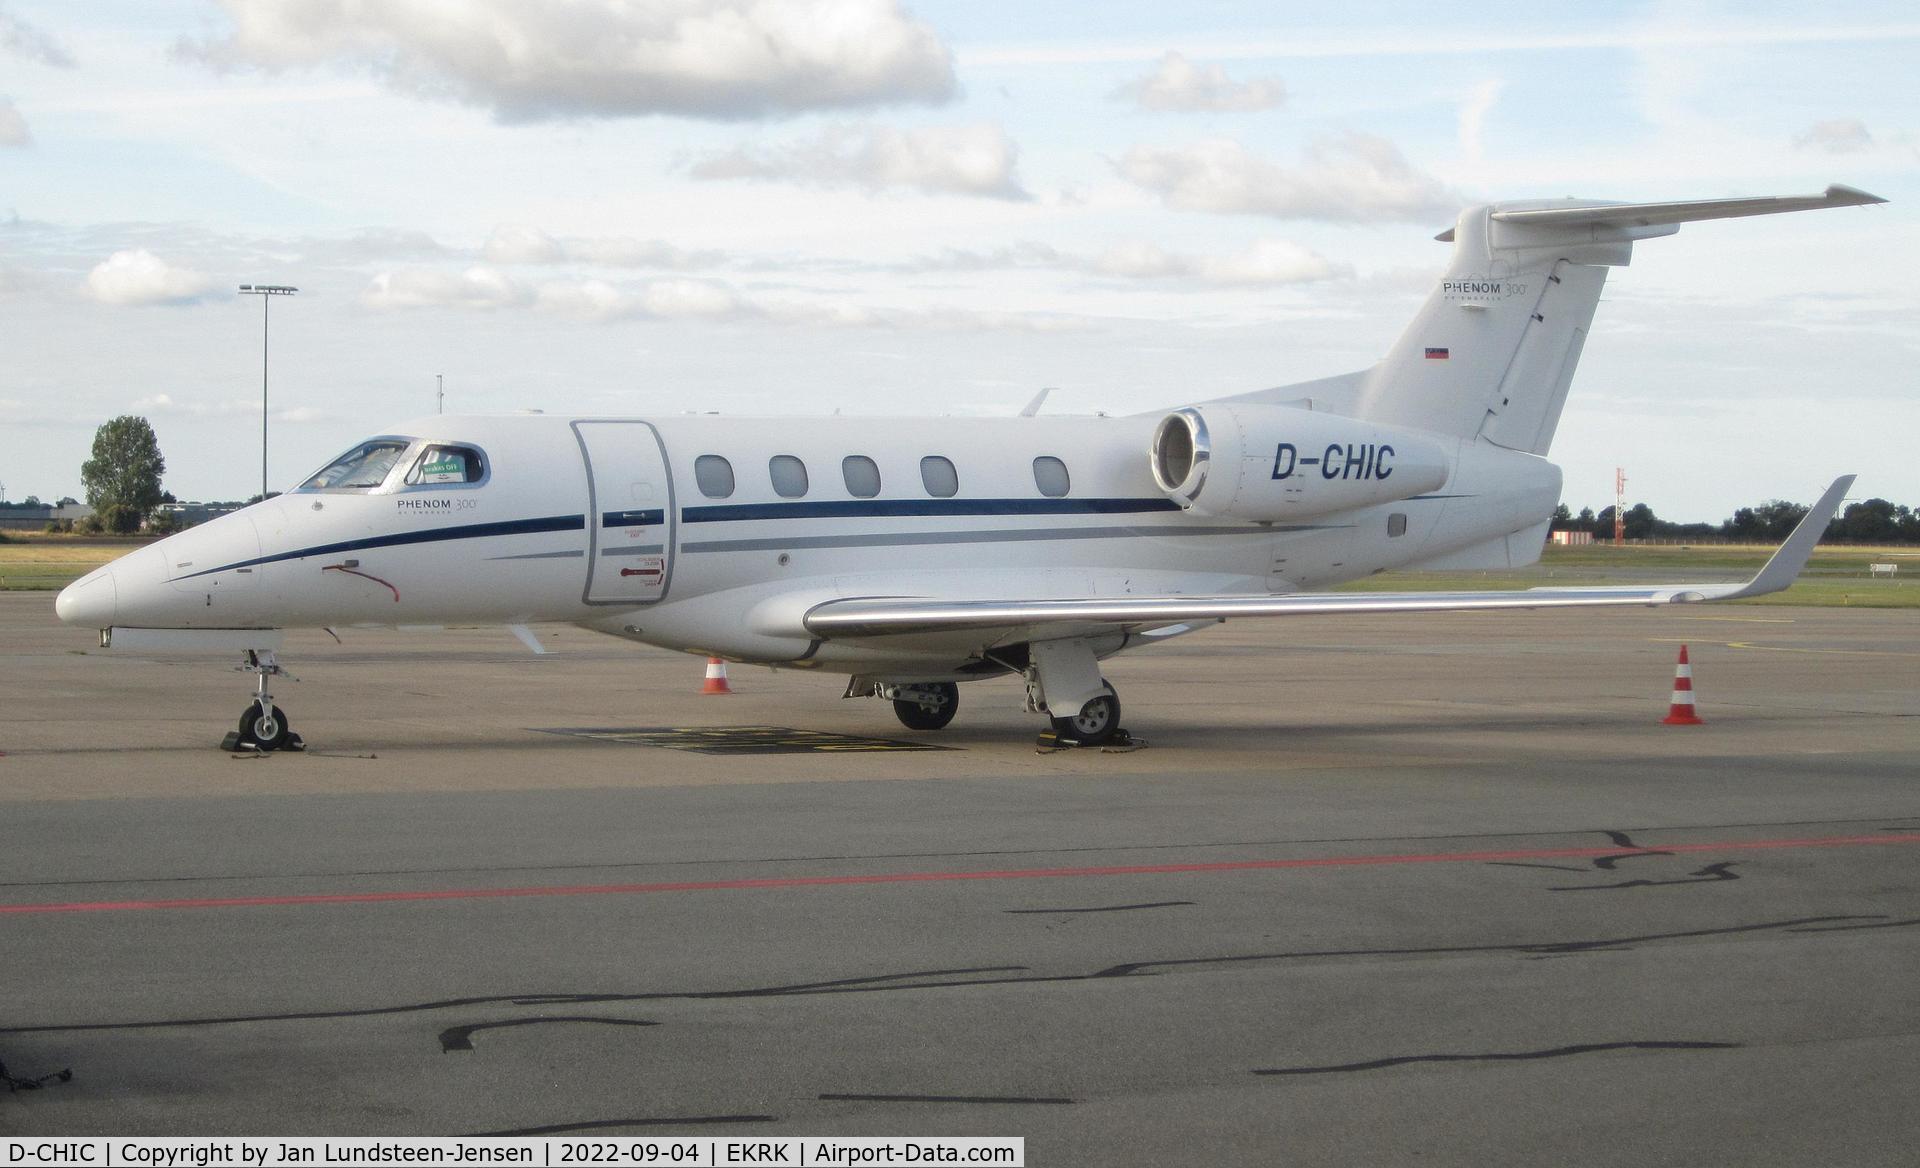 D-CHIC, 2012 Embraer EMB-505 Phenom 300 C/N 50500096, Embraer 505 Phenom 300 D-CHIC seen parked on the apron at Roskilde Airport with a 'Brakes Off' sign in the cockpit side window.